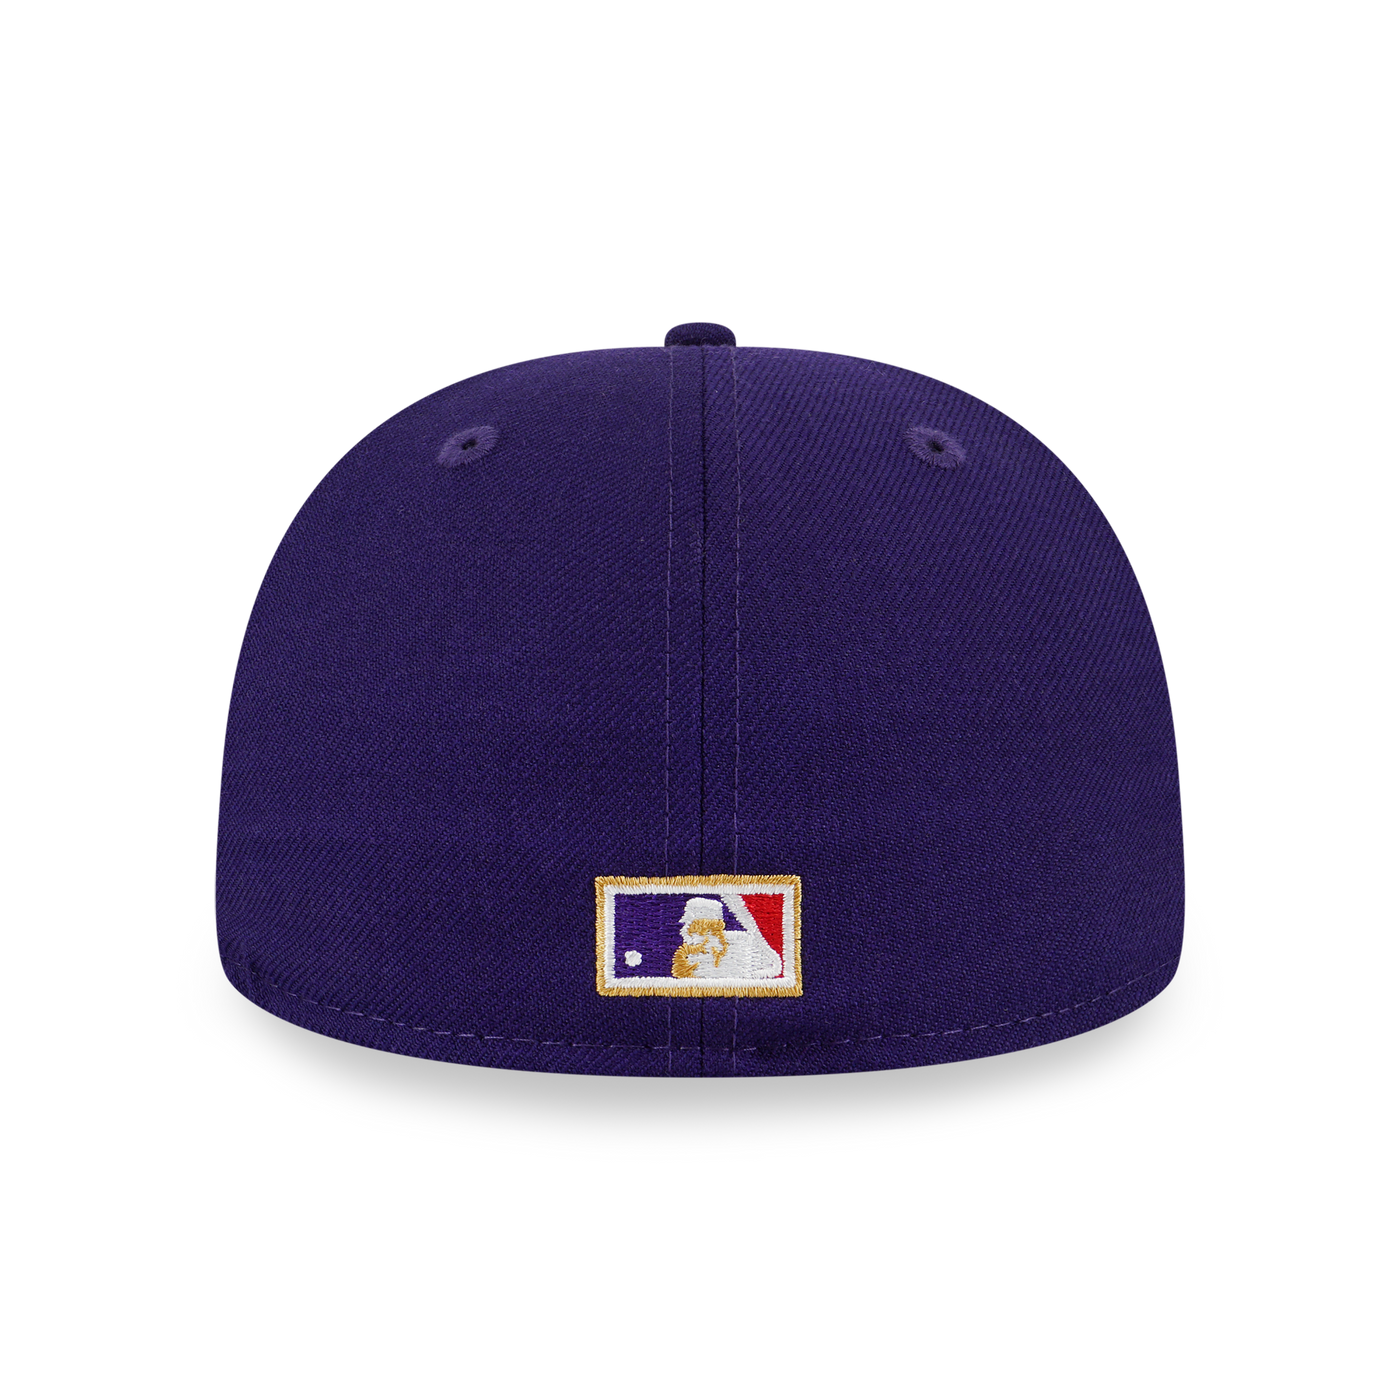 NEW YORK YANKEES COOPERSTOWN ROYAL PURPLE 59FIFTY CAP